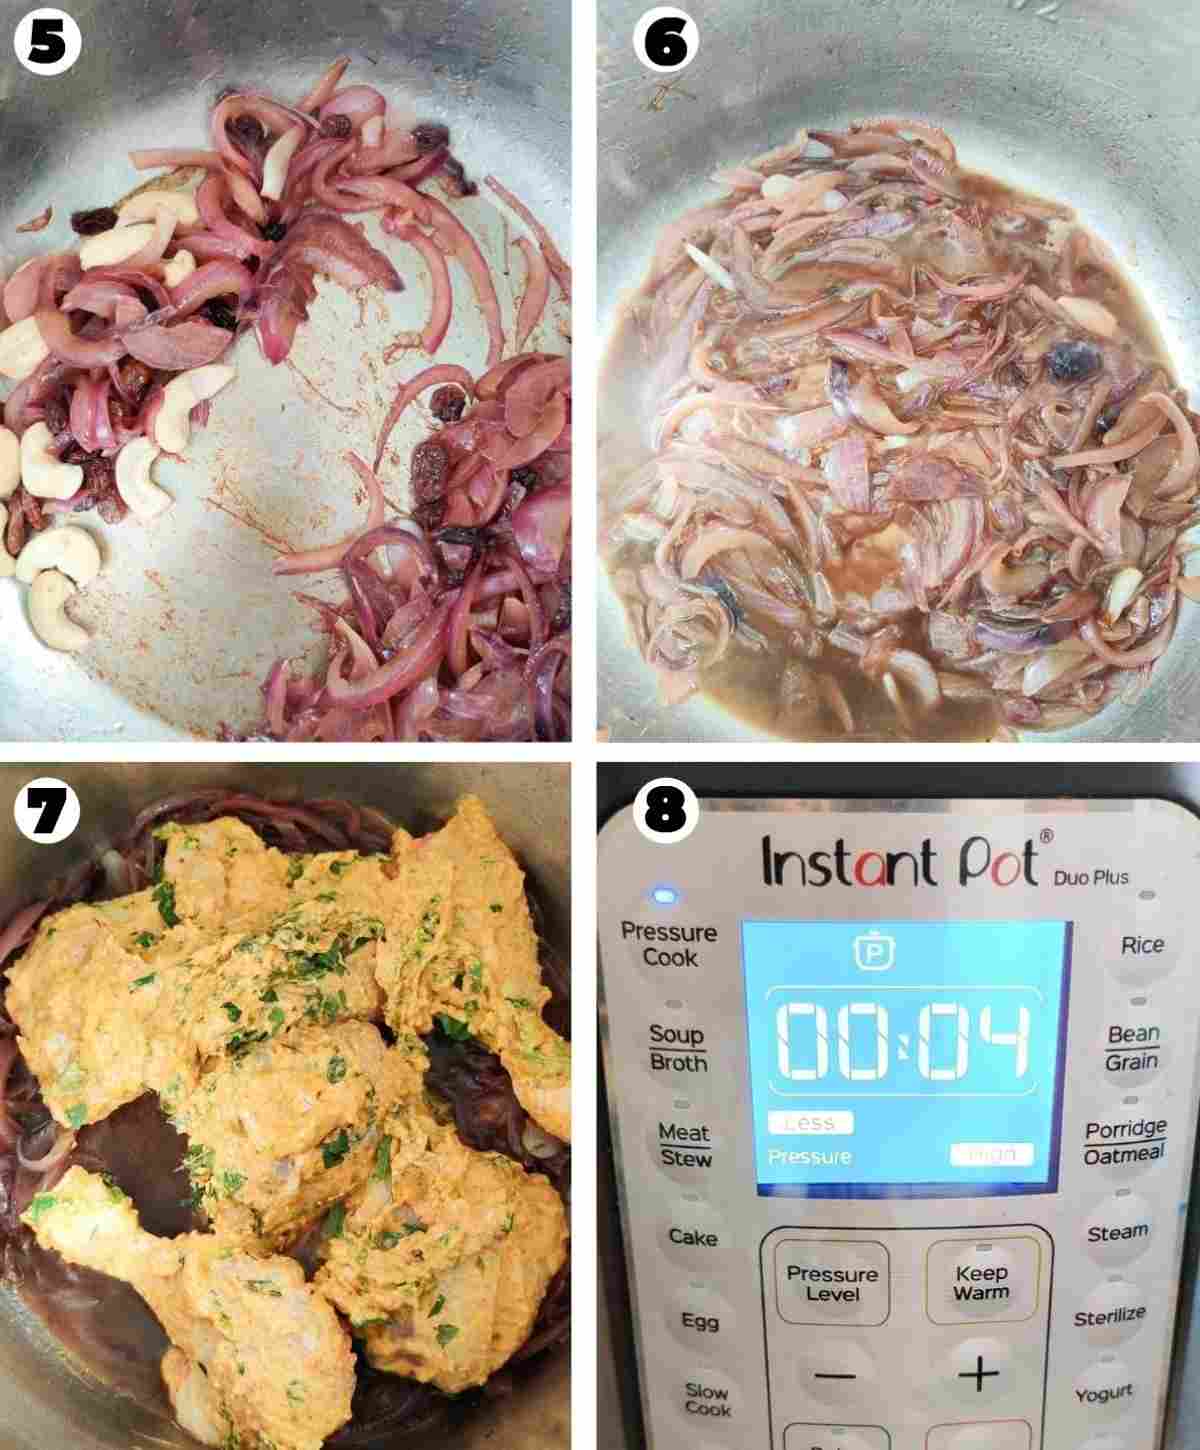 Cooking onions and adding chicken to the Instant Pot